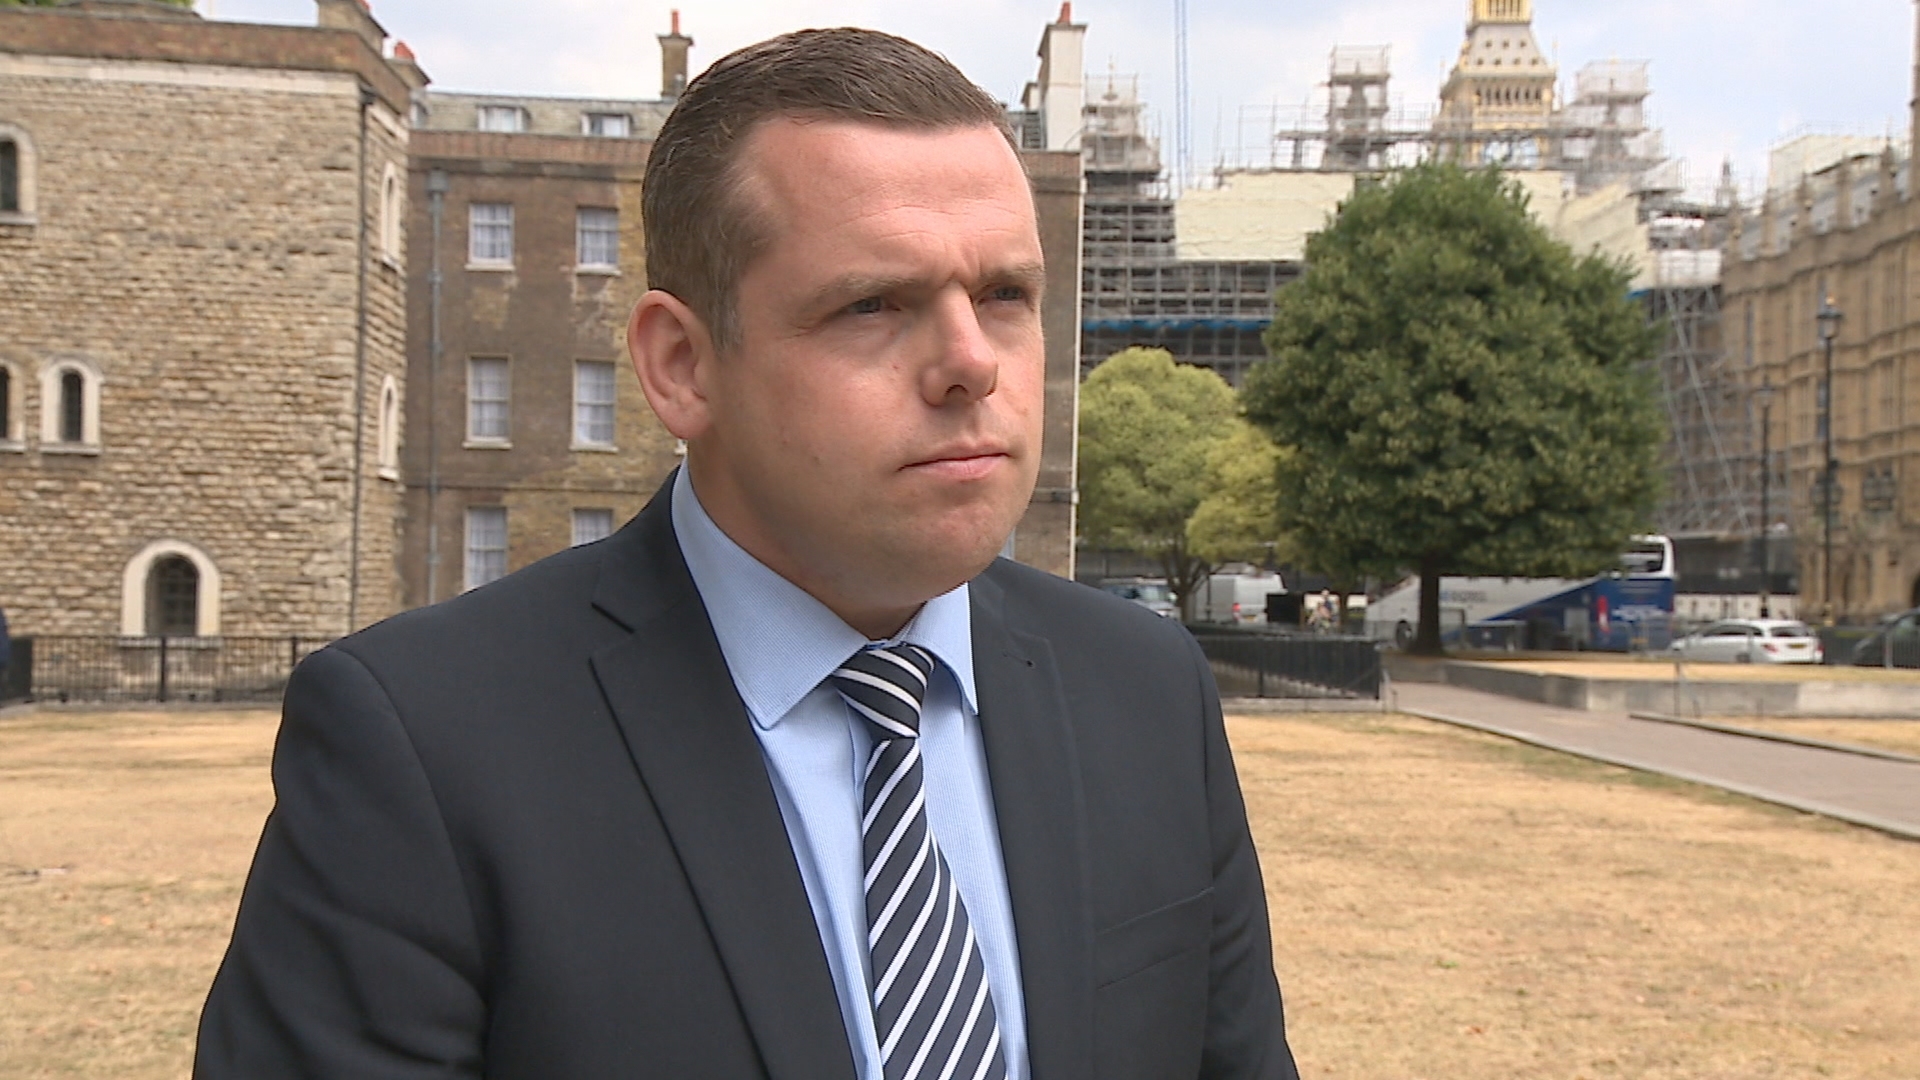 Douglas Ross said the police probe into SNP finances has been 'deeply damaging' for Scotland.